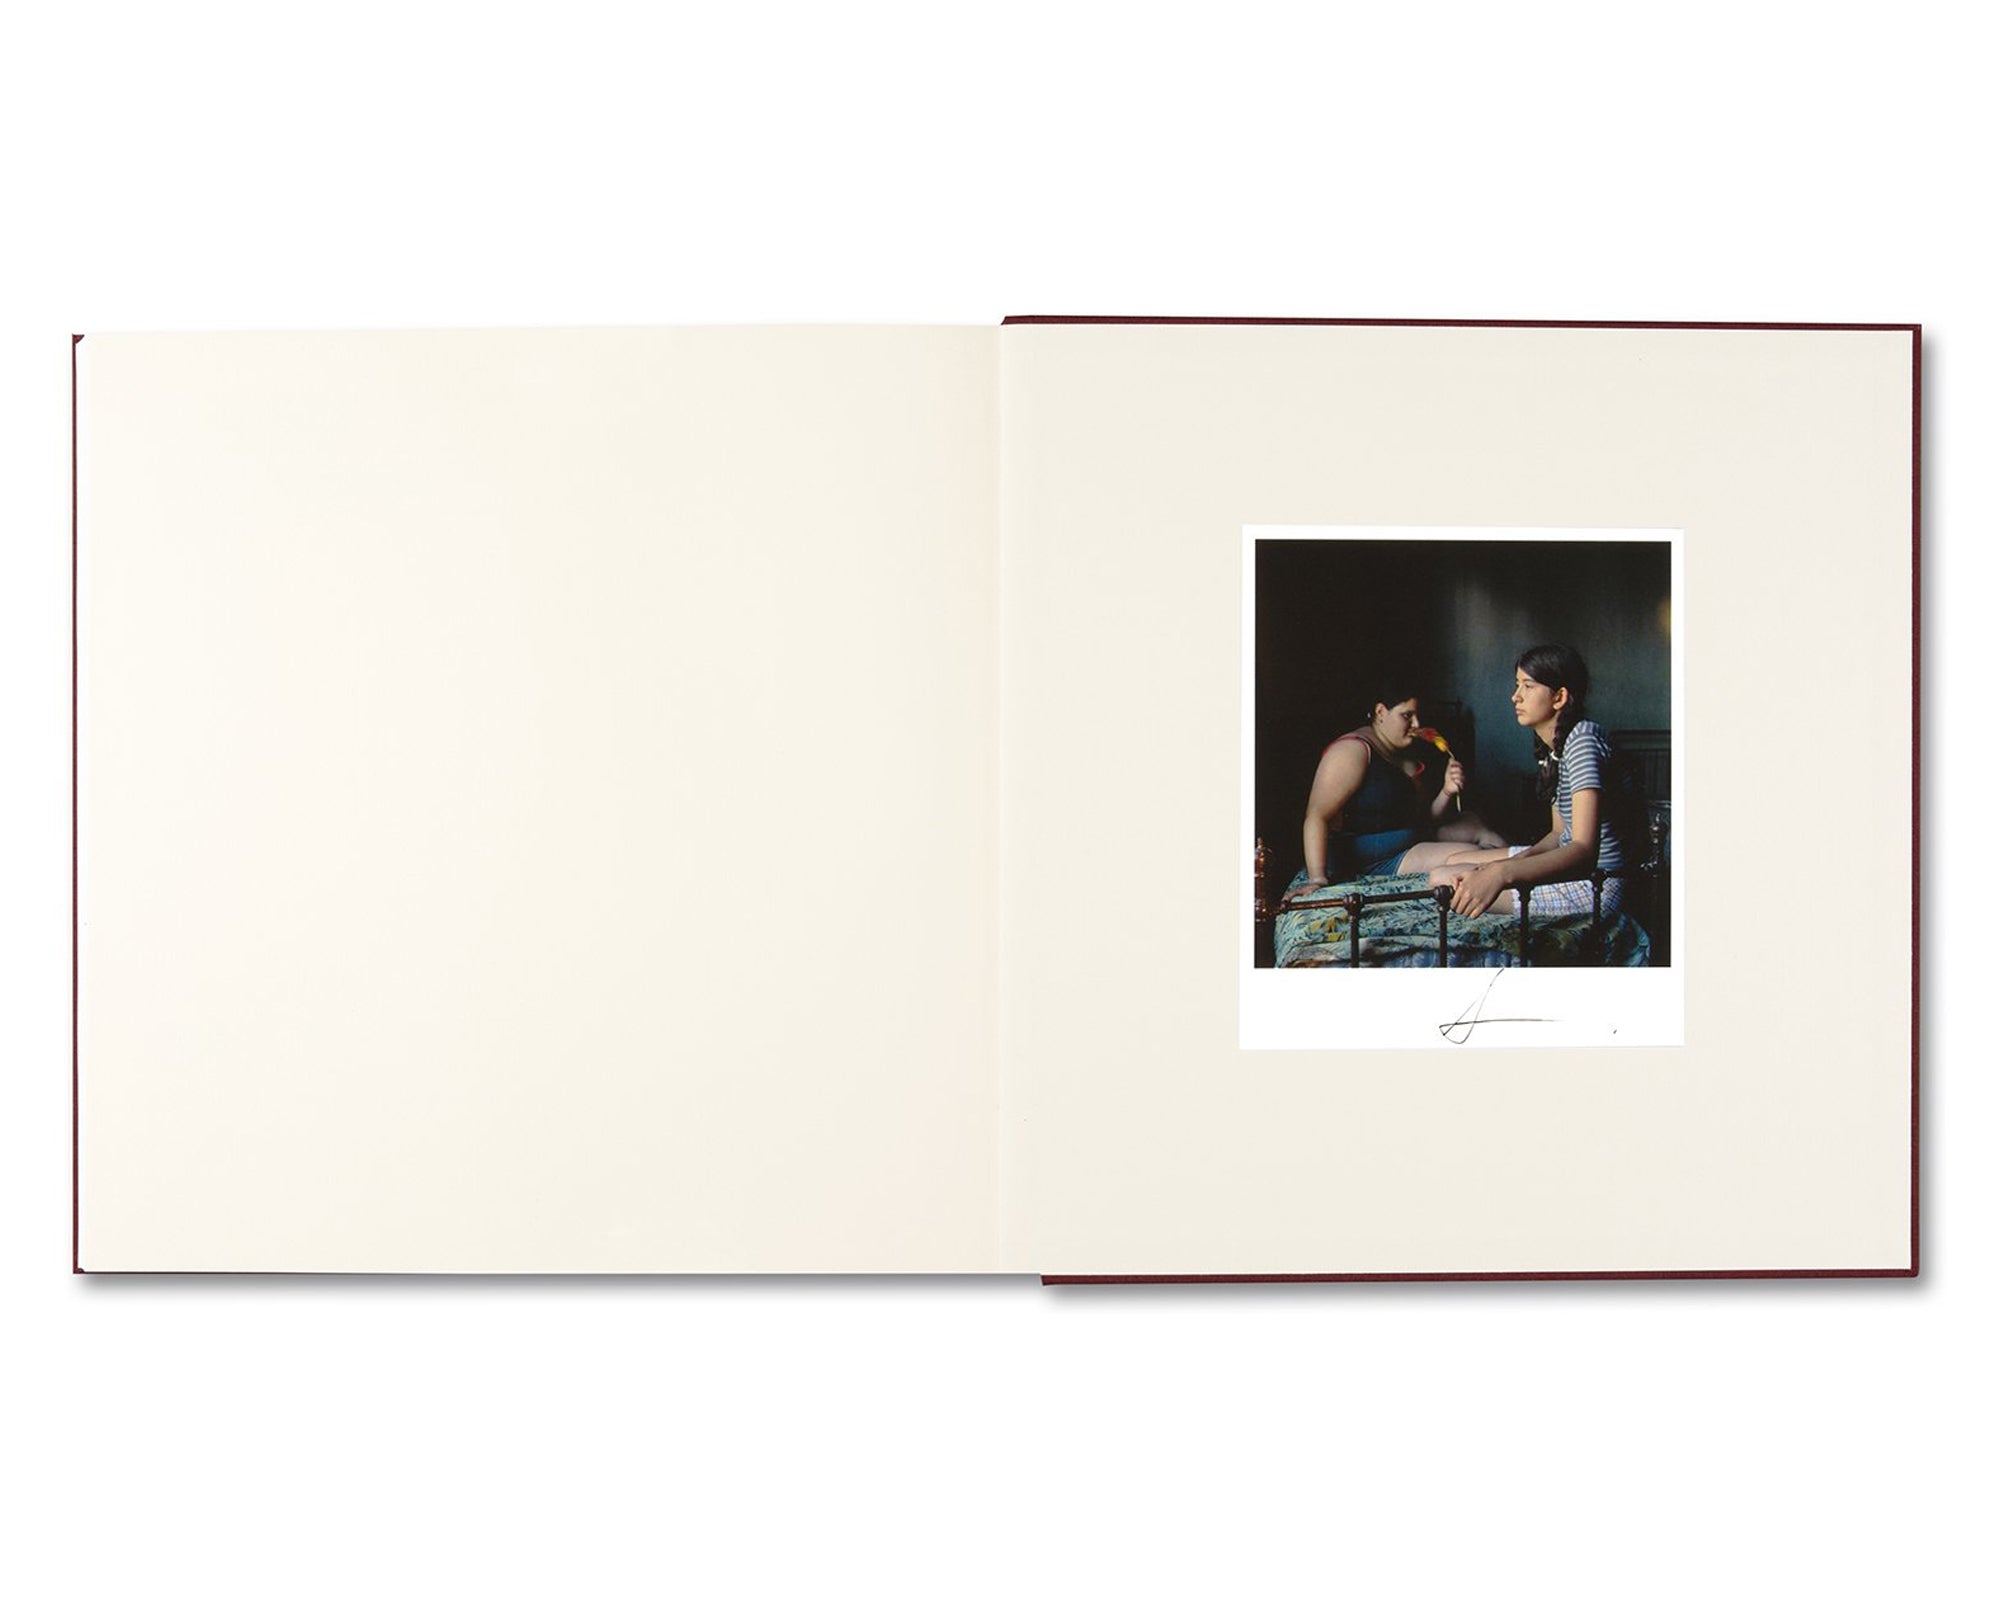 THE ADVENTURES OF GUILLE AND BELINDA AND THE ENIGMATIC MEANING OF THEIR DREAMS by Alessandra Sanguinetti [SIGNED]